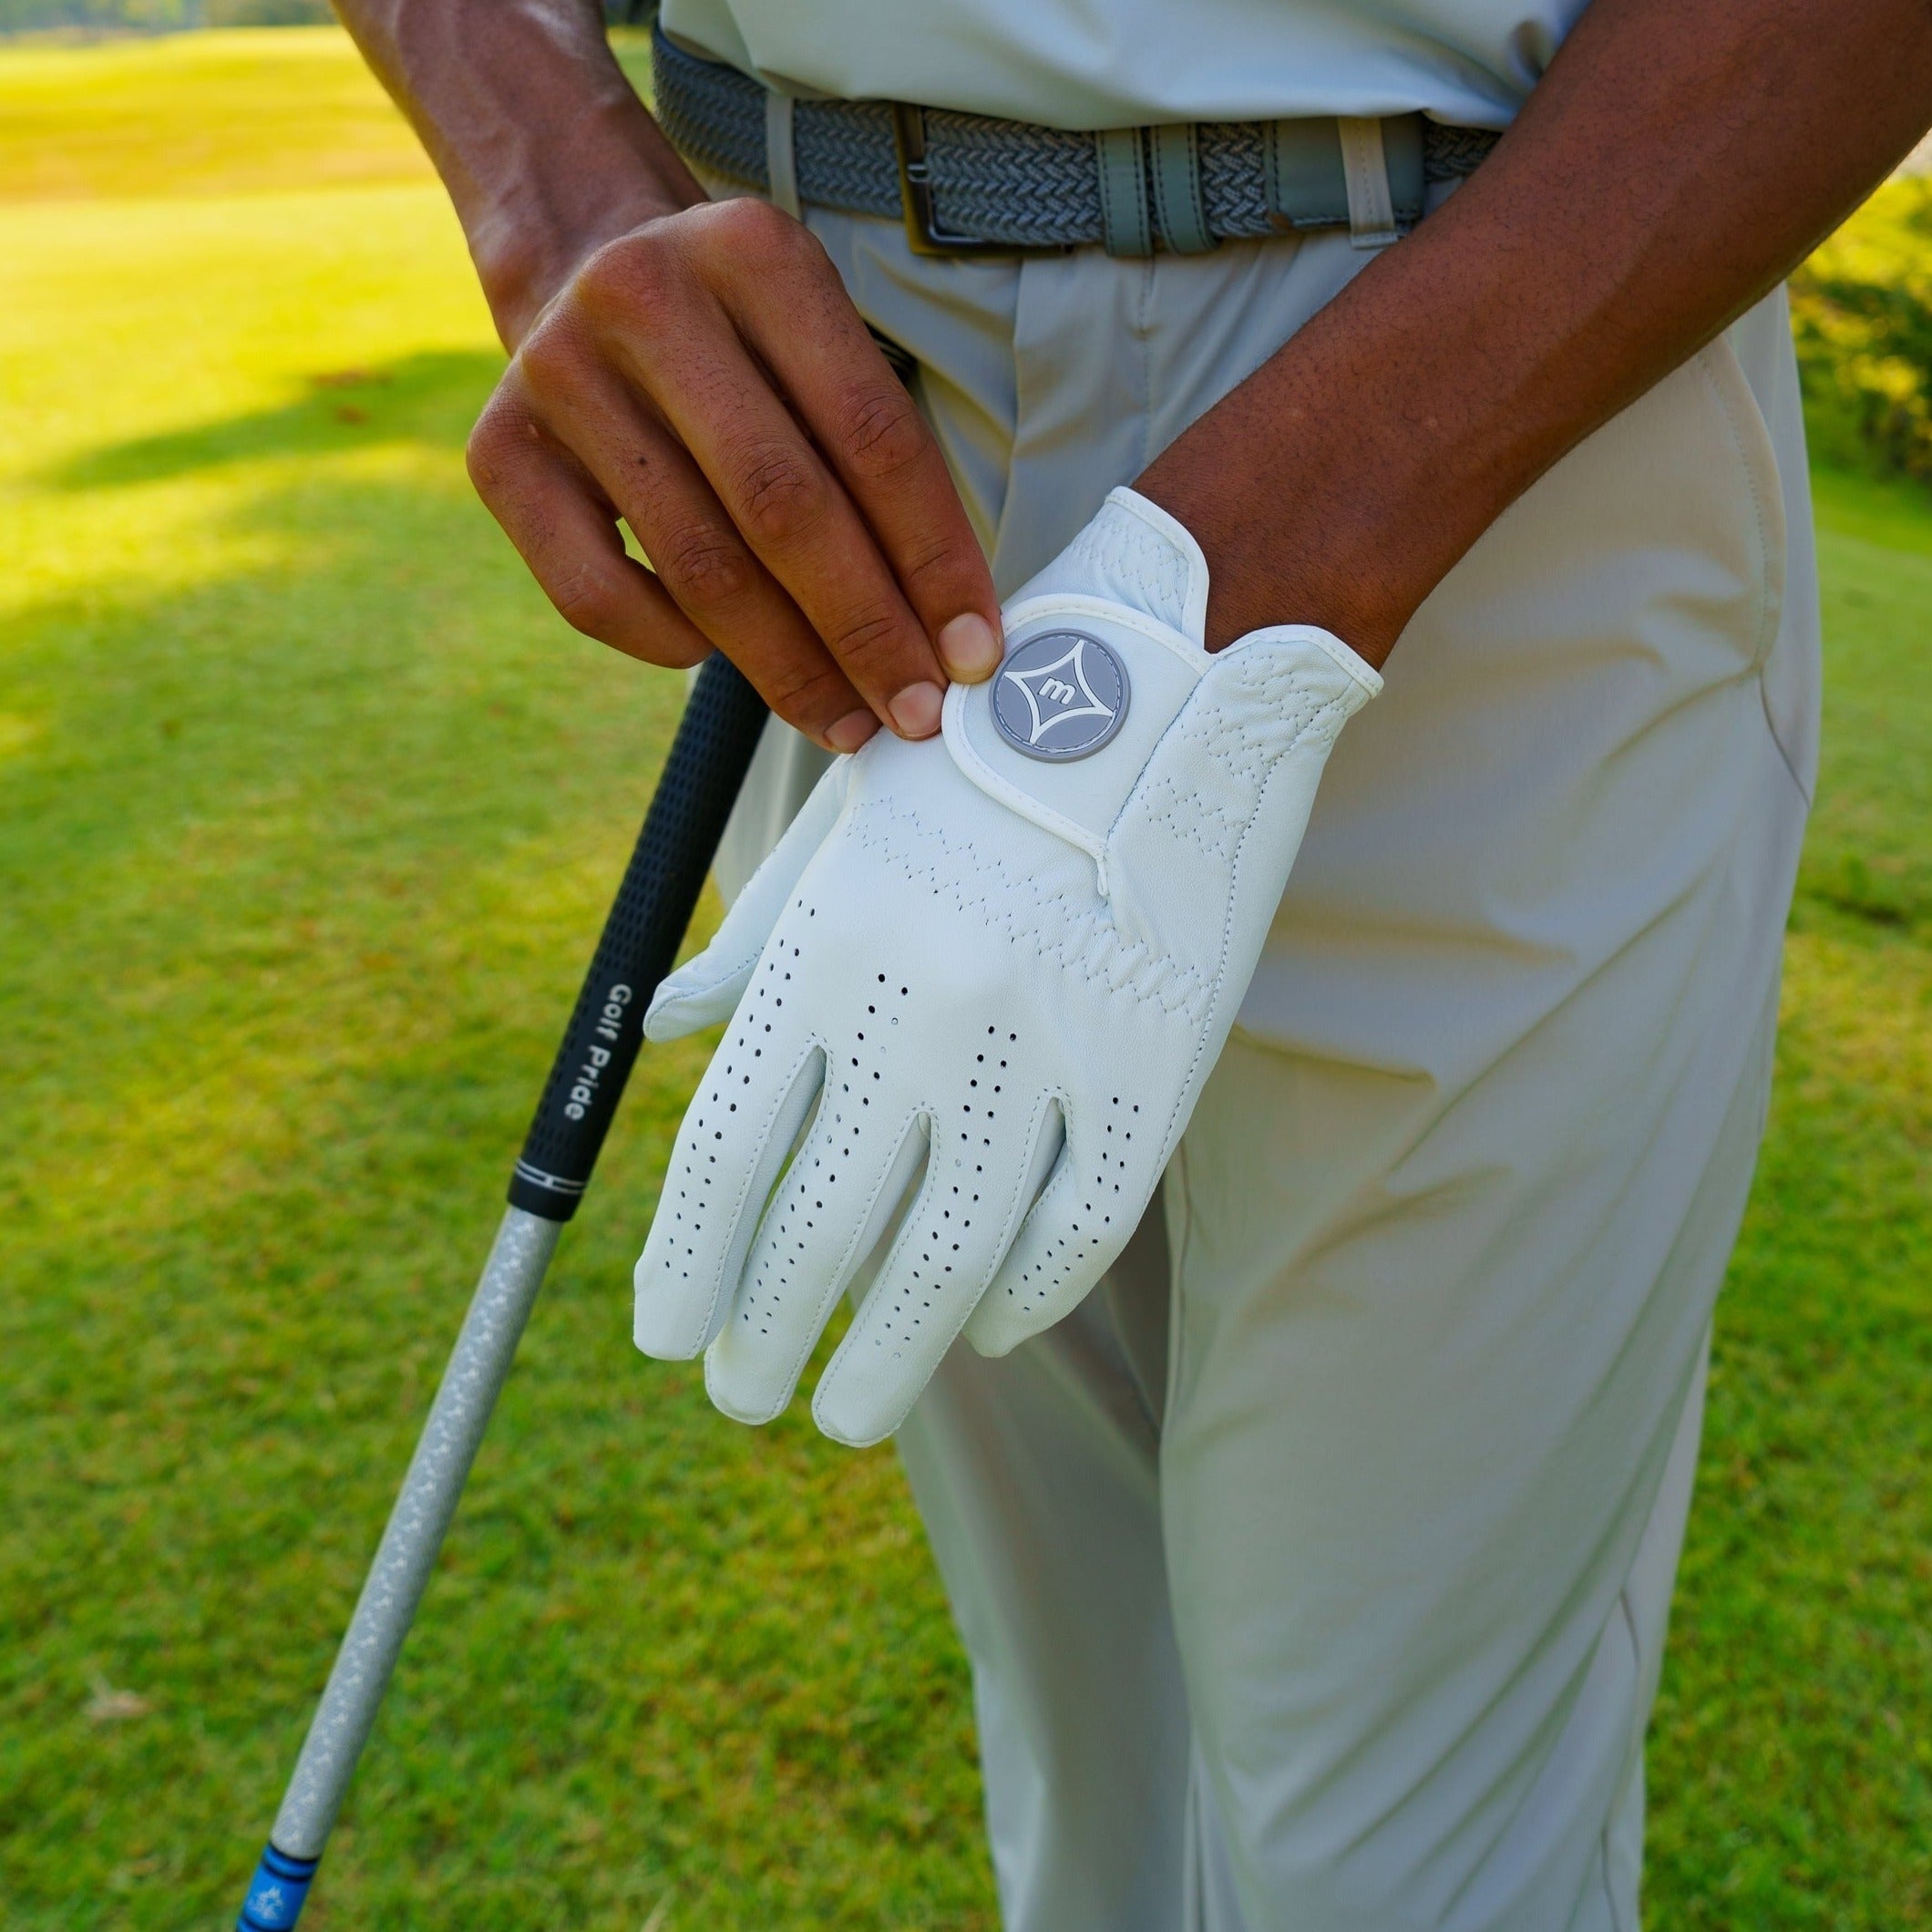 The InTouch Performance Golf Glove – Motier Lafayette